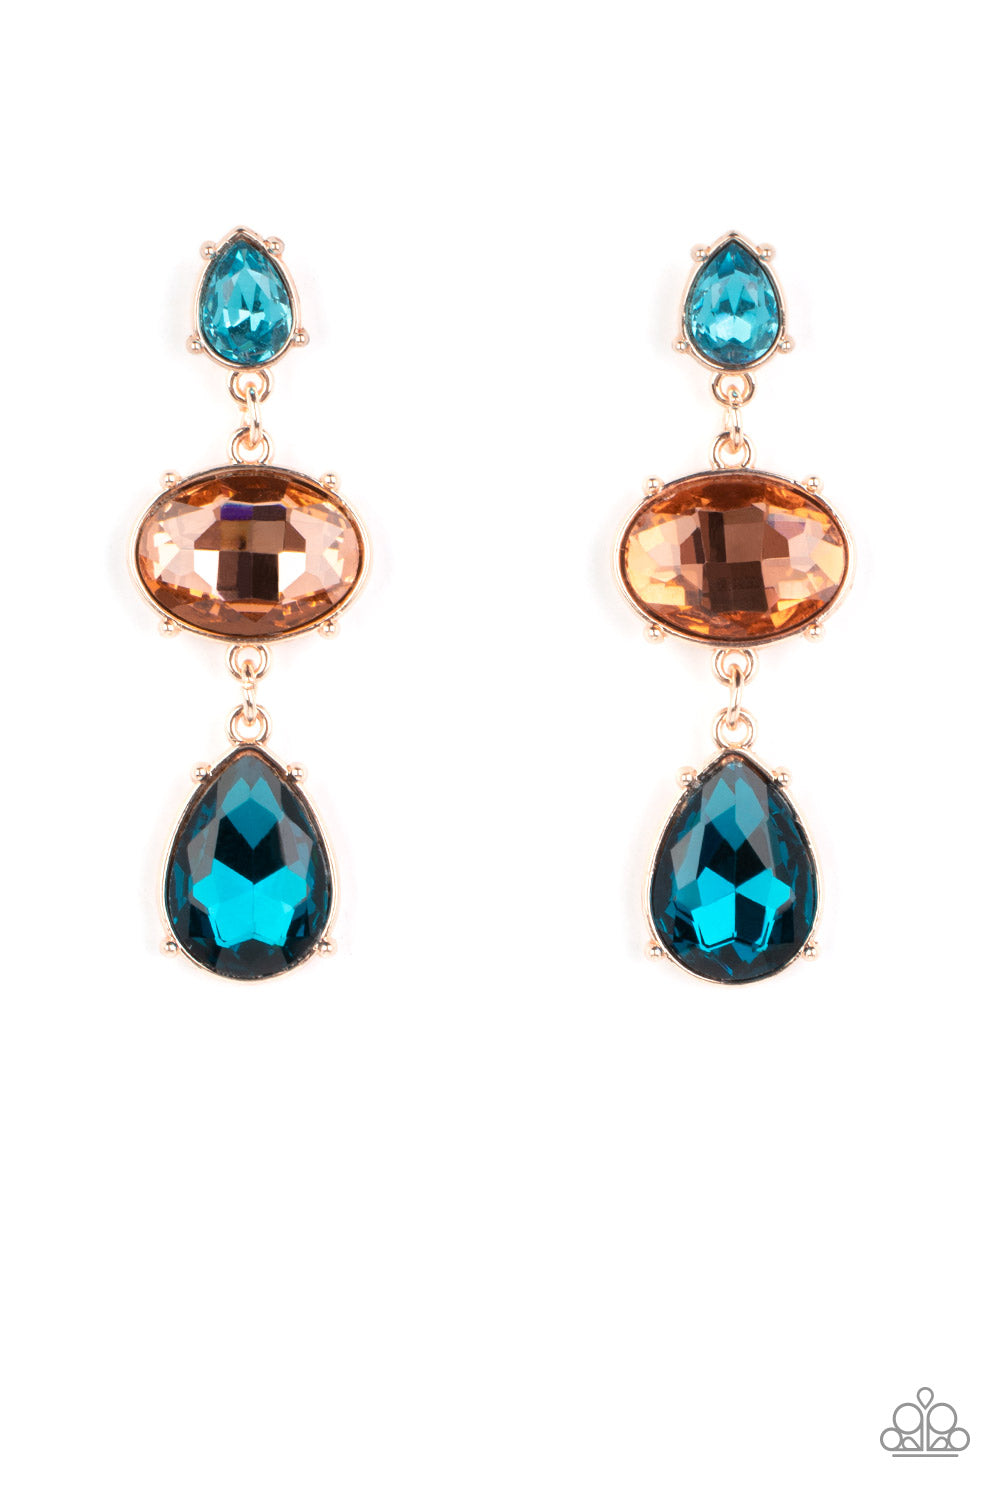 Paparazzi Accessories Royal Appeal - Multi A small, light blue, teardrop-shaped gem gives way to a peachy oval-shaped rhinestone tilted on its side. A large, deep blue teardrop swings from the oval above, adding dramatic movement to the colorful display.